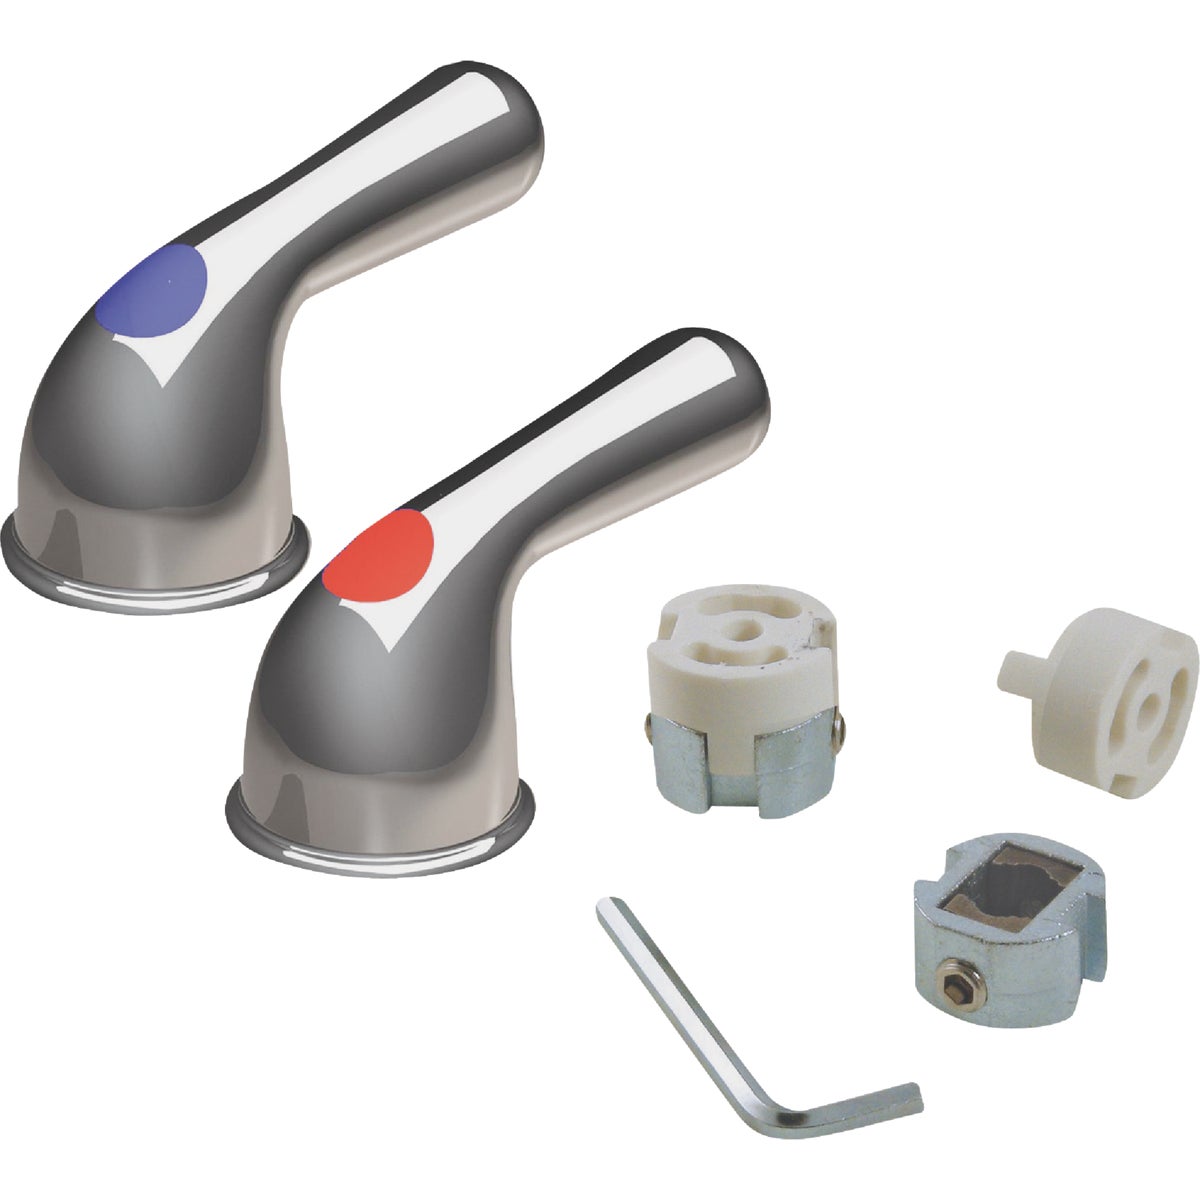 Item 453075, New style lever handles. Includes vice grip adapters to fit most faucets.